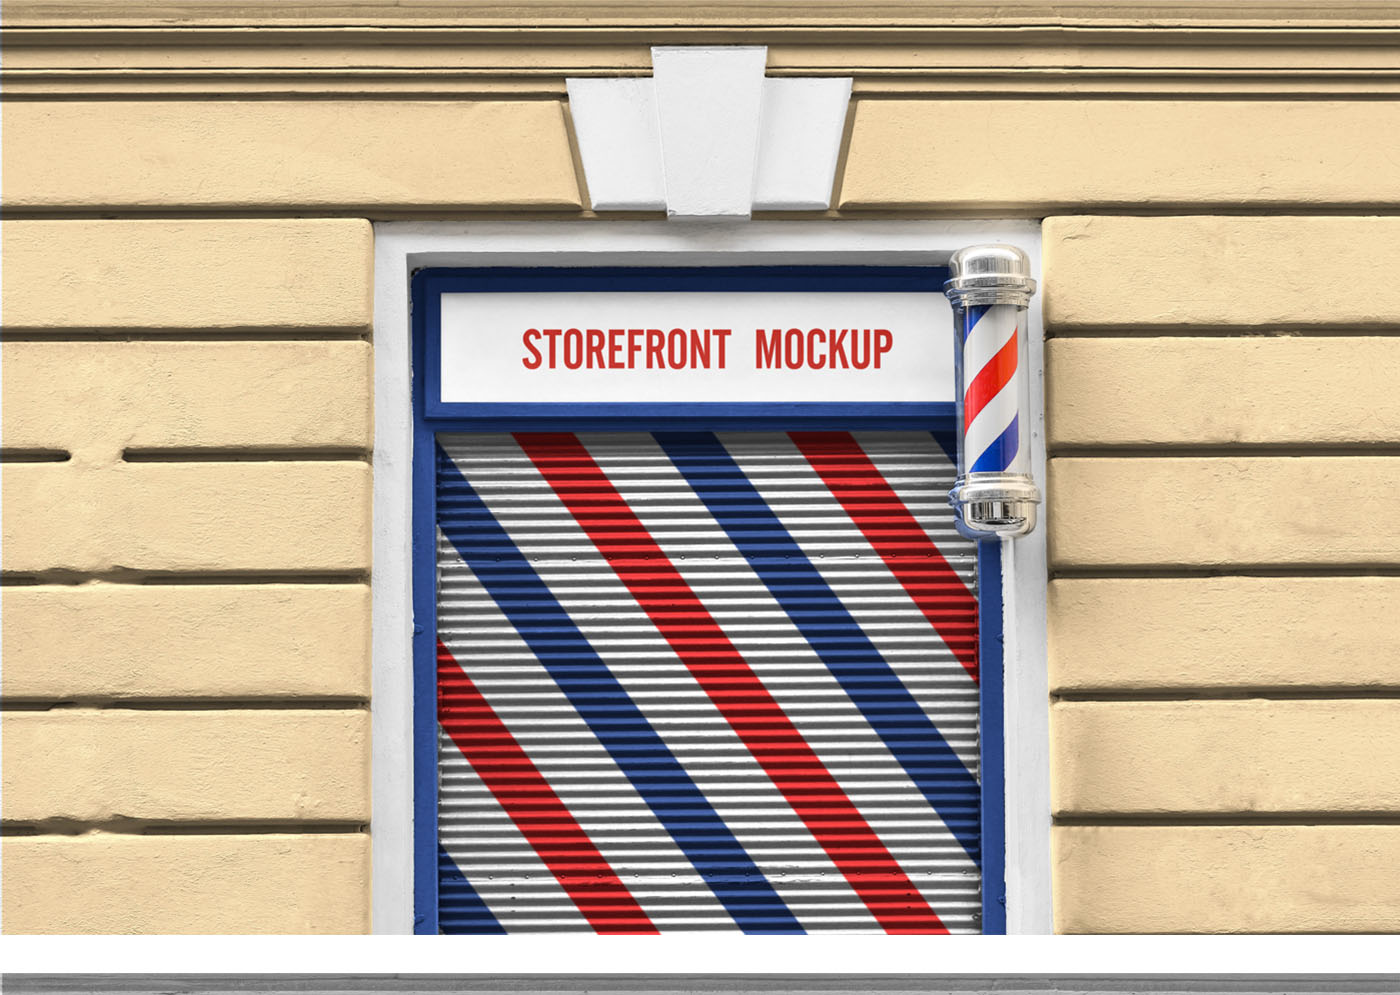 Download 40+ Free Facades and Storefronts Mockups in PSD & Premium ...